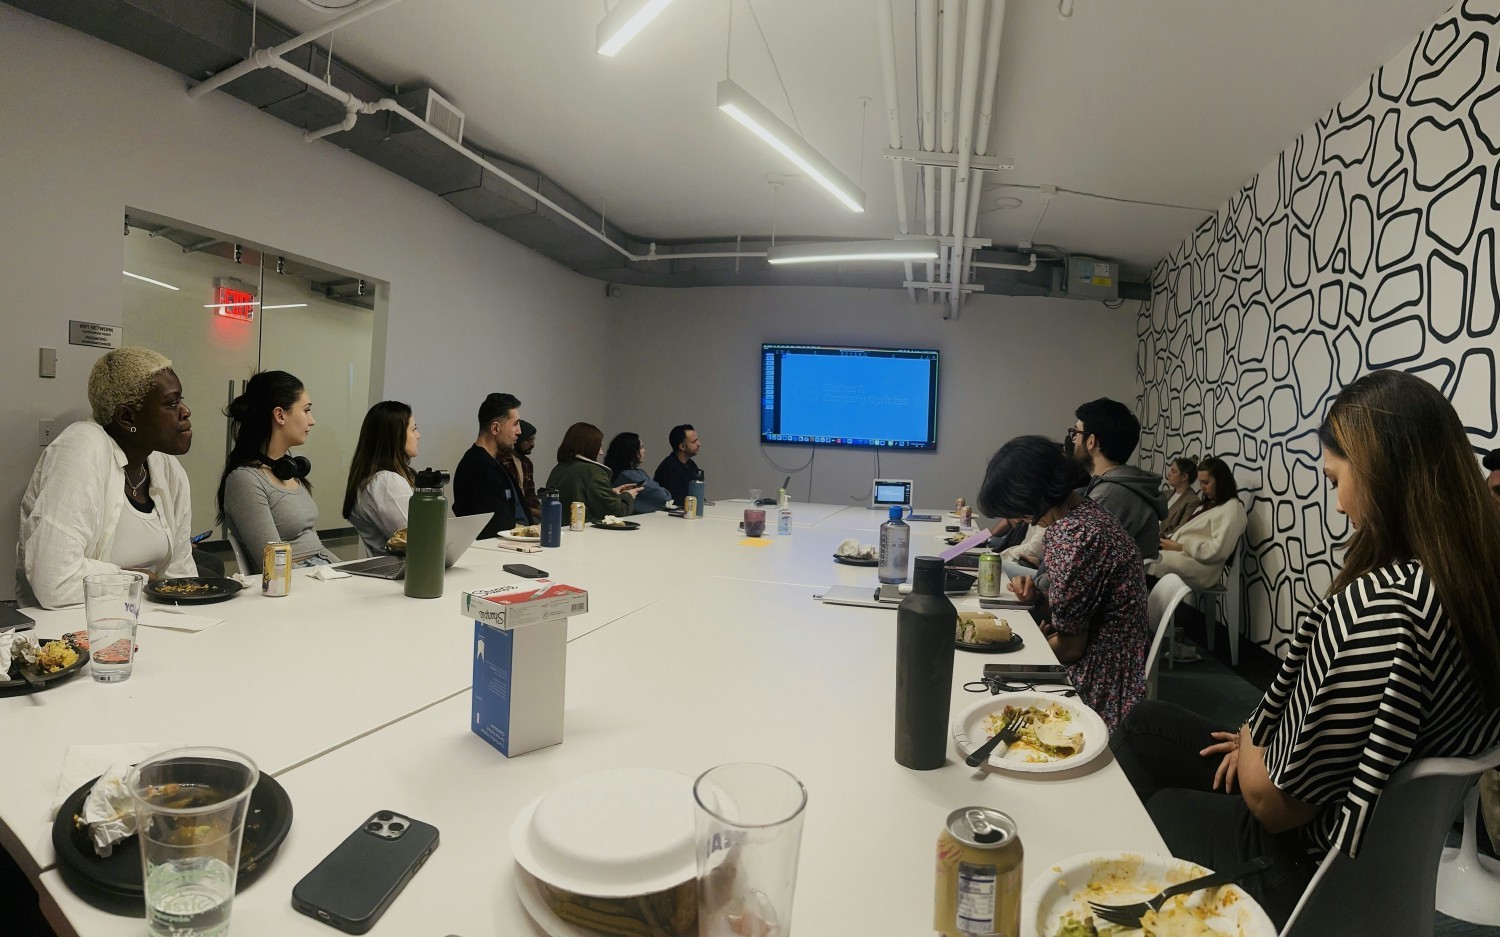 A Heady lunch + learn session.